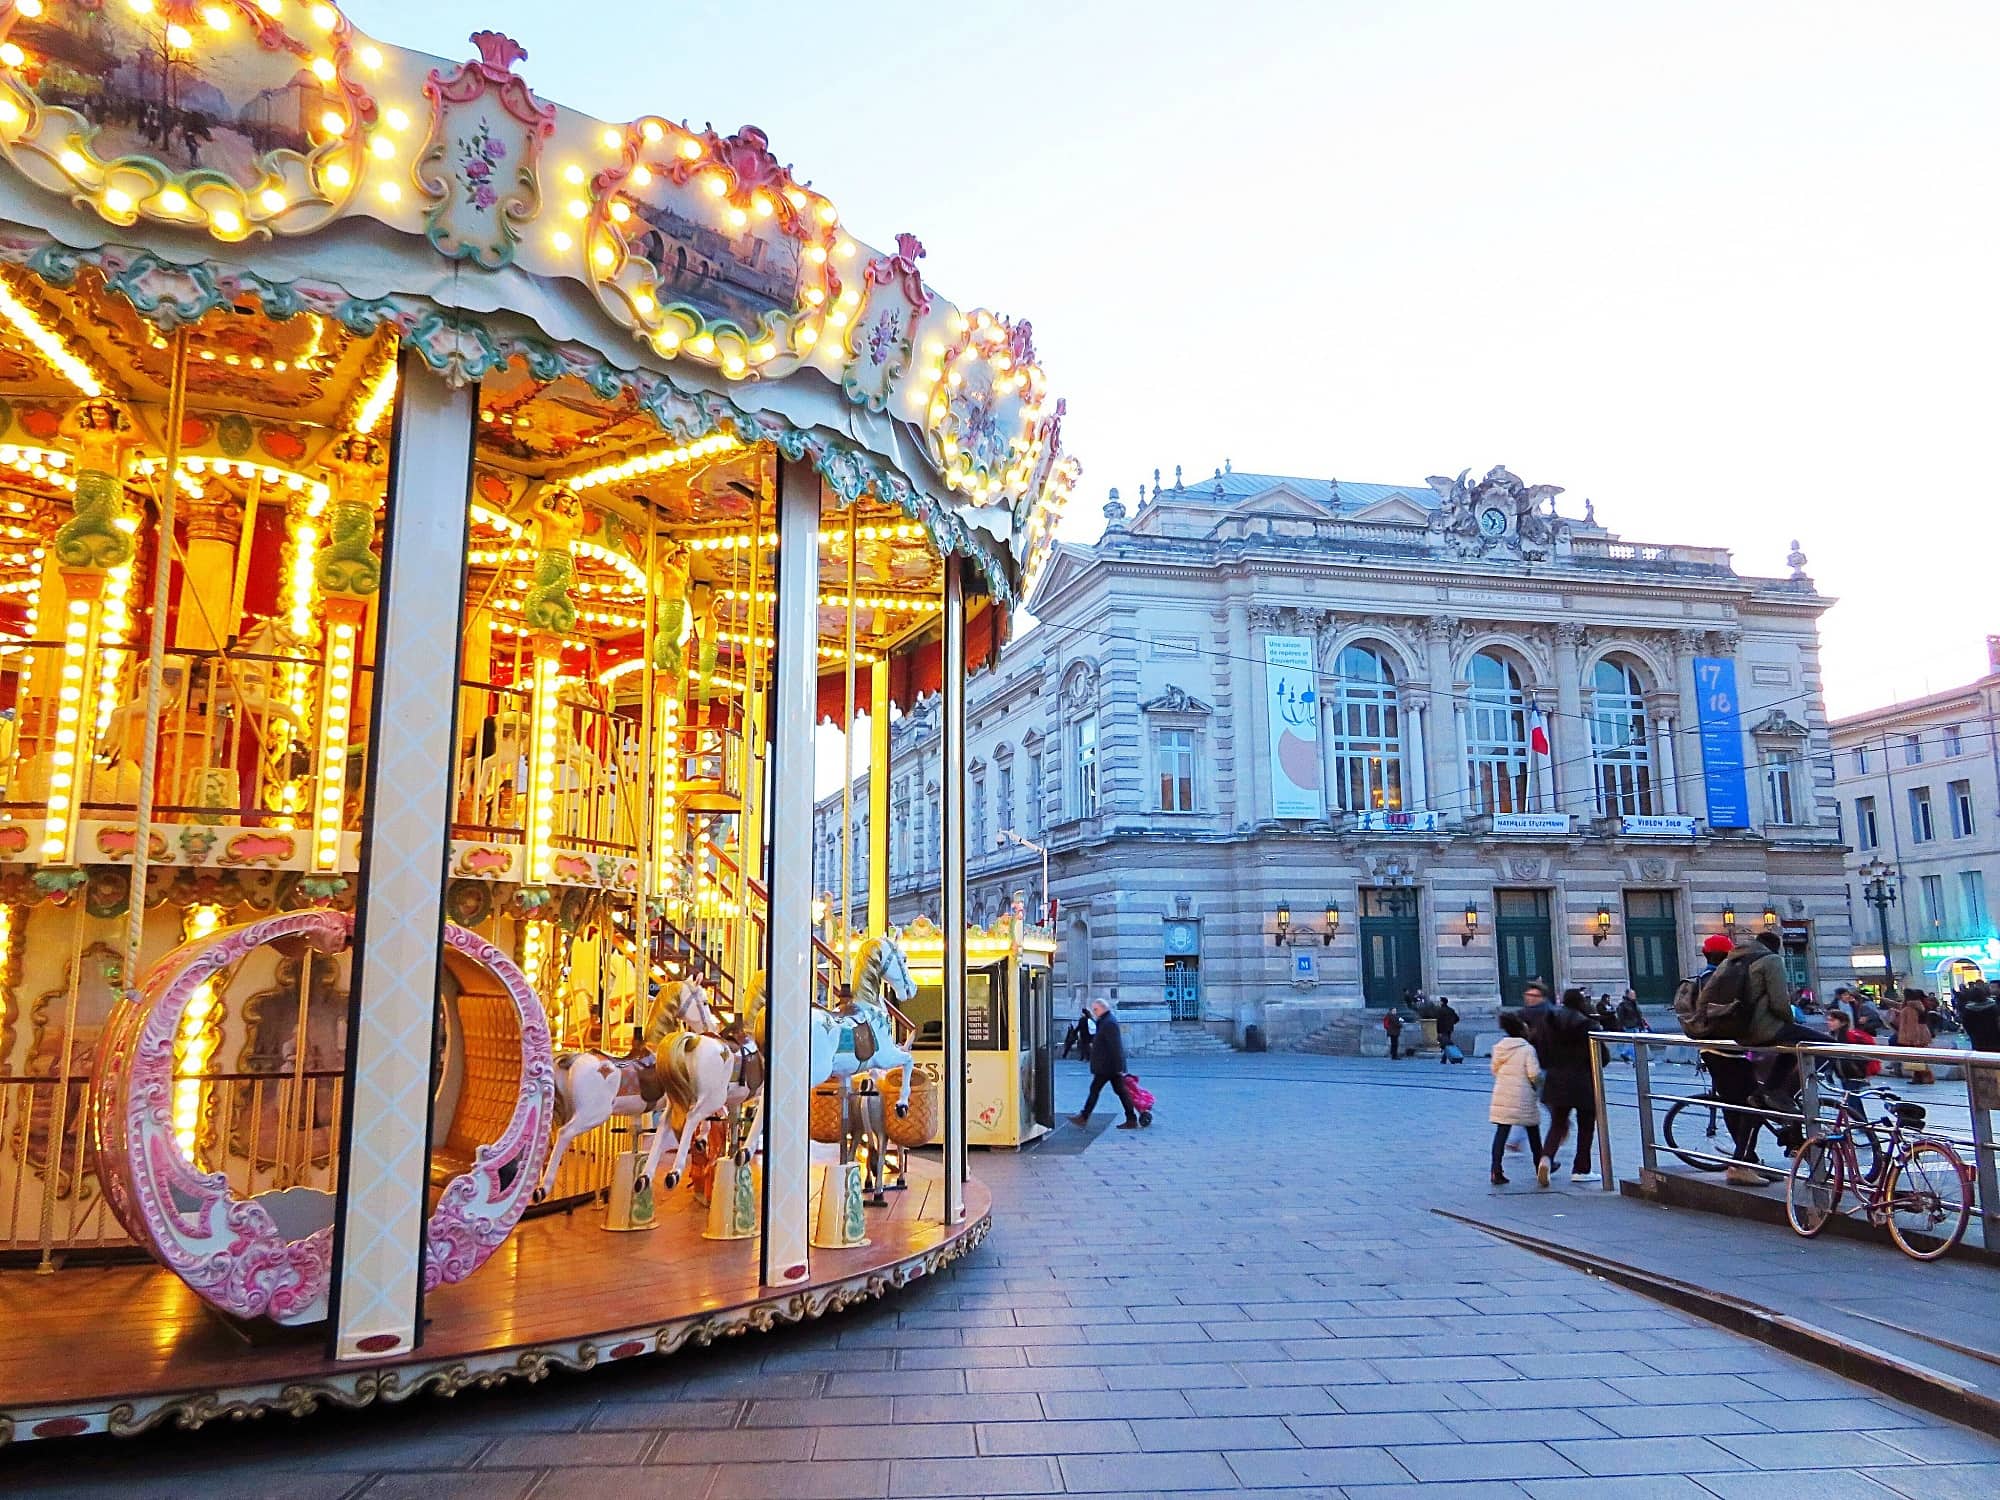 The carousel and opera house on La Place de la Comedie in Montpellier, France